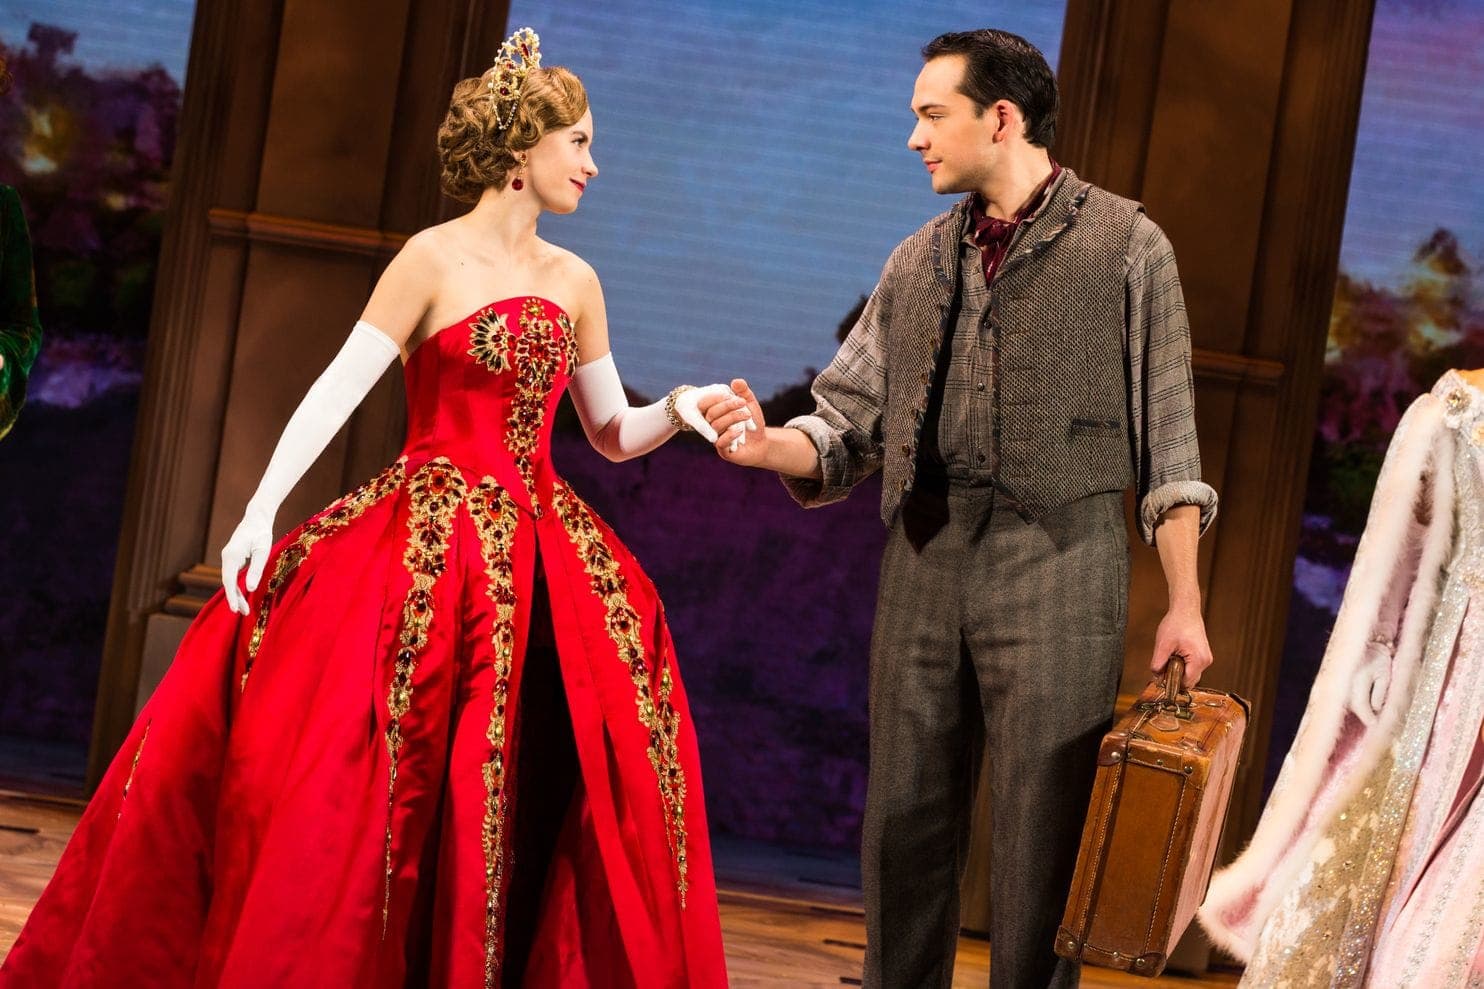 Lila Coogan (Anya) and Stephen Brower (Dmitry) in the national tour of 'Anastasia.' Photo by Evan Zimmerman.